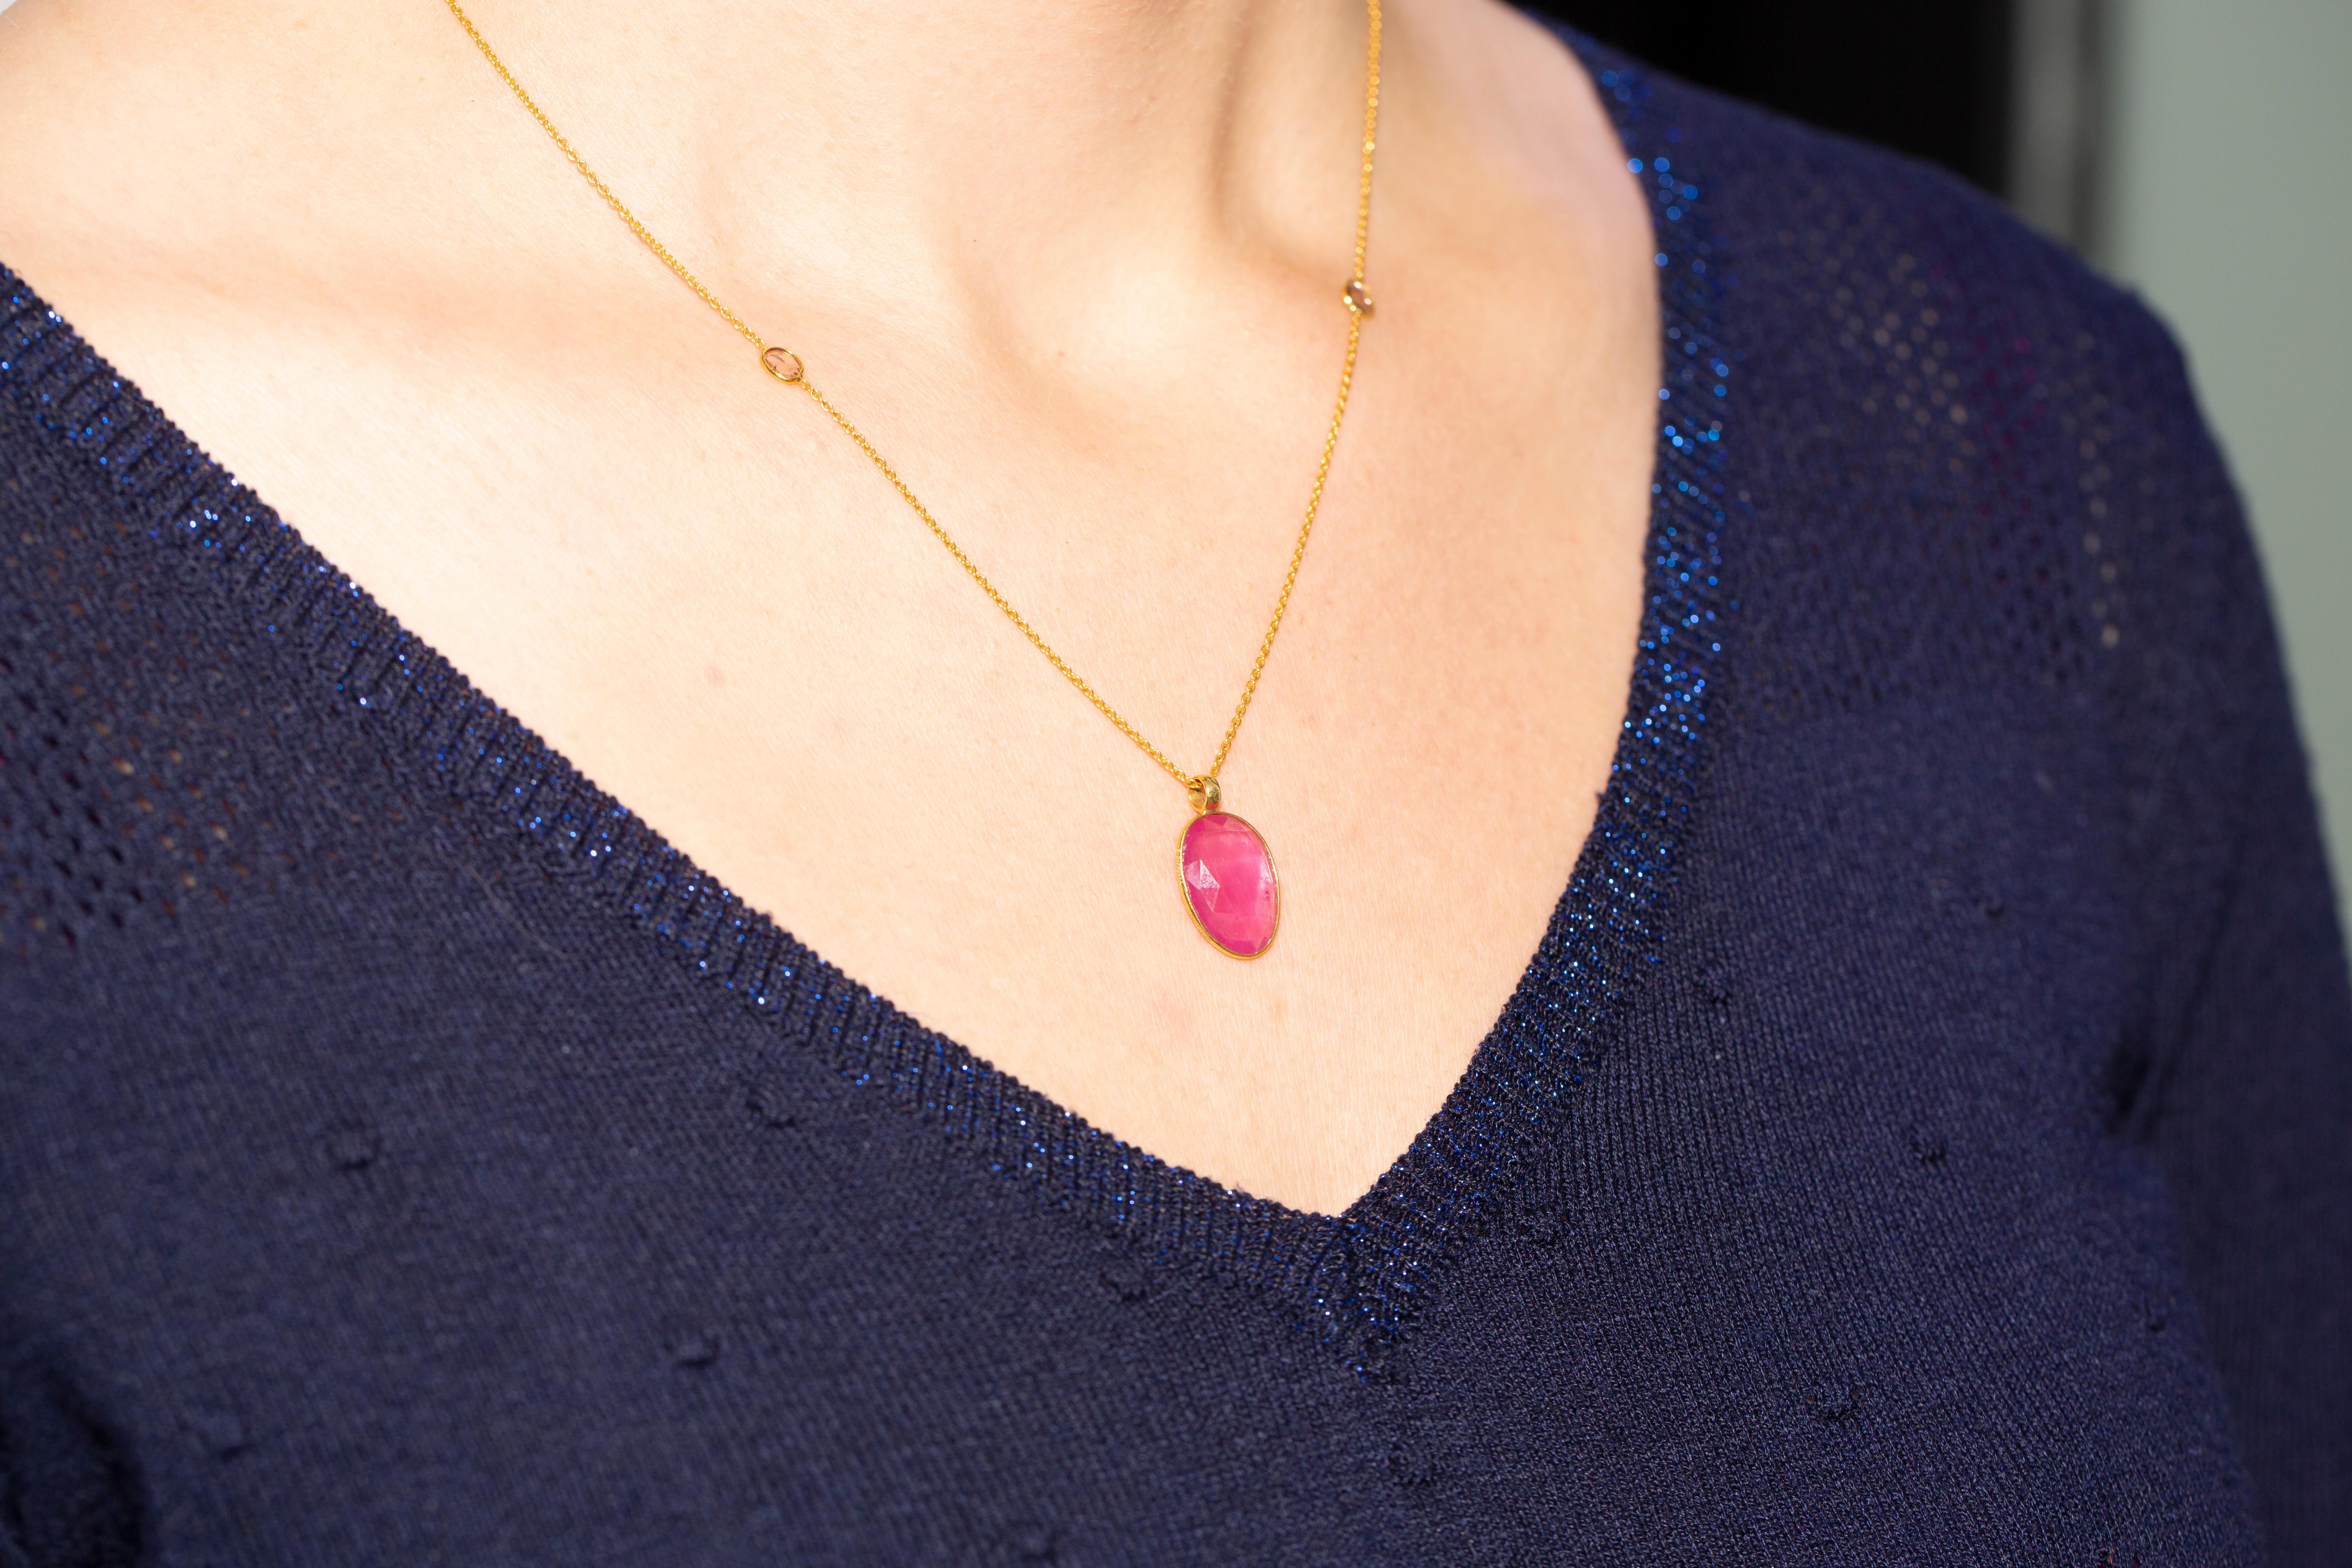 This stunning timelessly elegant rose cut 5.80 Carat Ruby from the Artisan collection is set in luxurious 18 Karat Yellow Gold chain featuring 0.12 total Carat weight of Diamond slices. Each peace is hand made with a unique shaped precious stone in